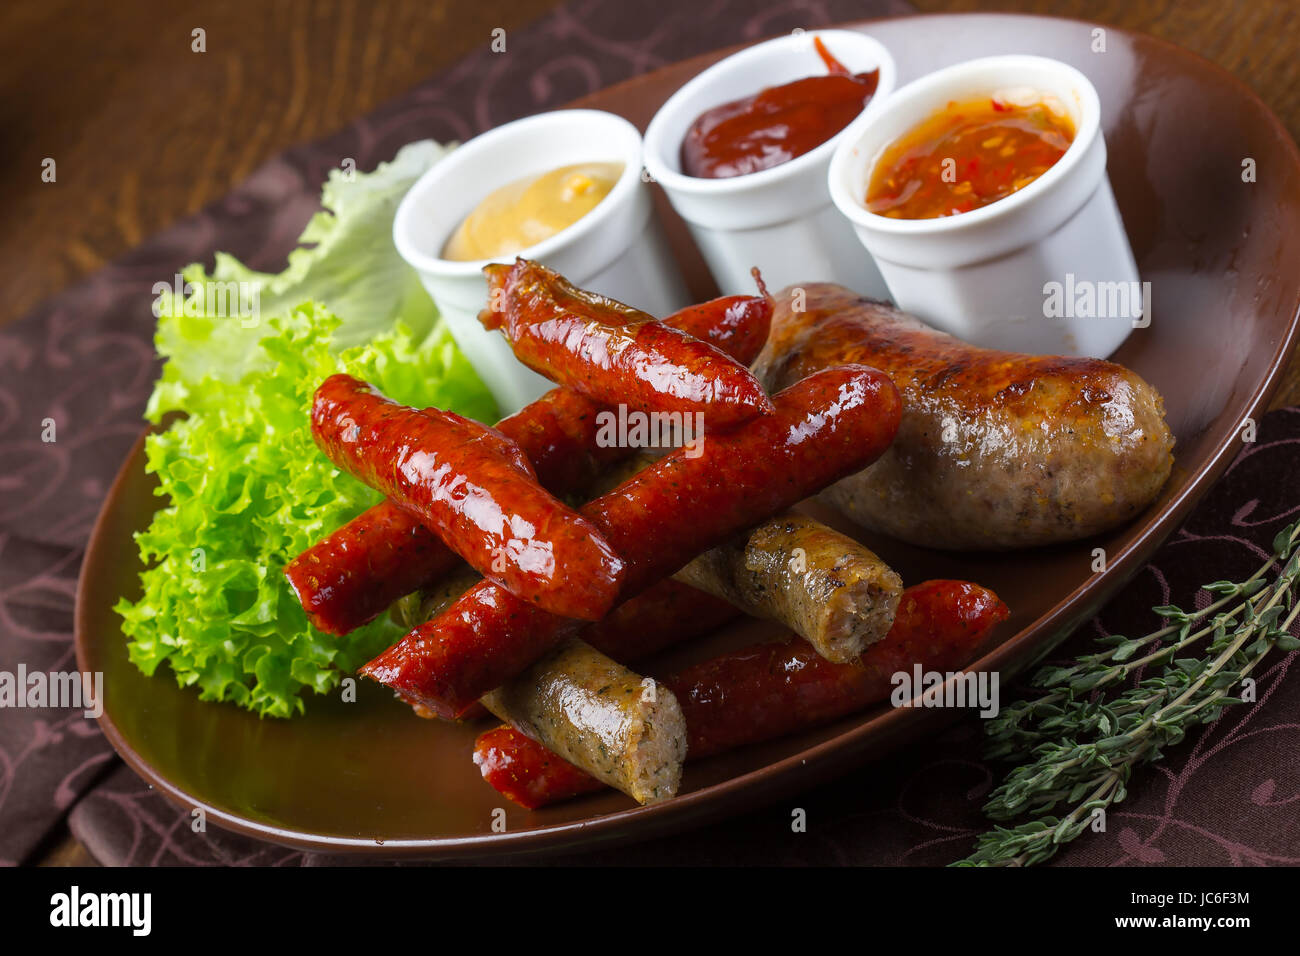 Grilled assorted sausages with sauces, salad and rosemary Stock Photo